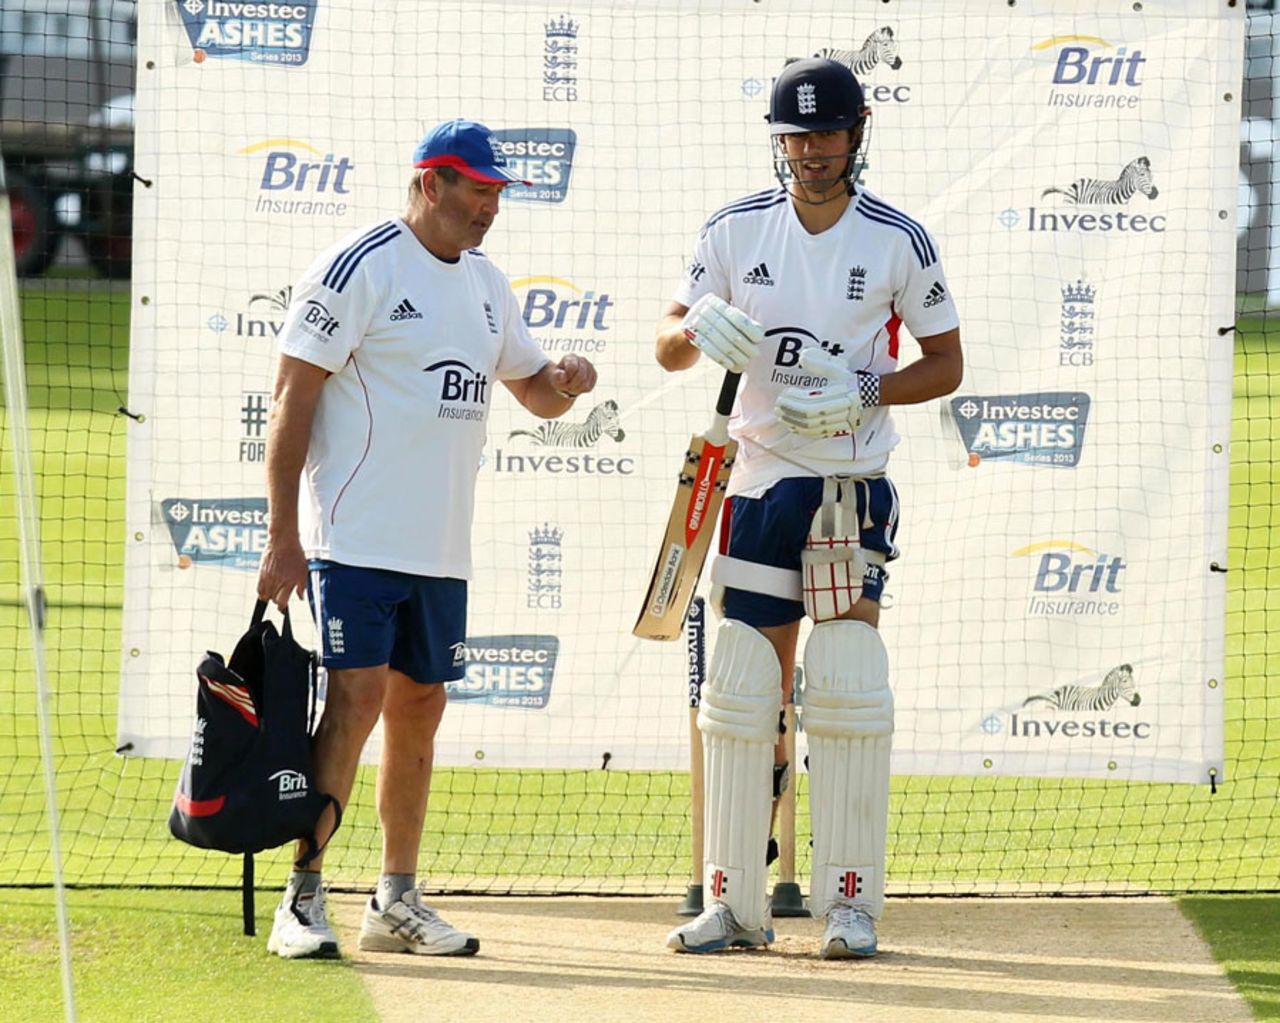 Graham Gooch chats with Alastair Cook in the nets, England v Australia, 5th Investec Test, The Oval, August 20, 2013